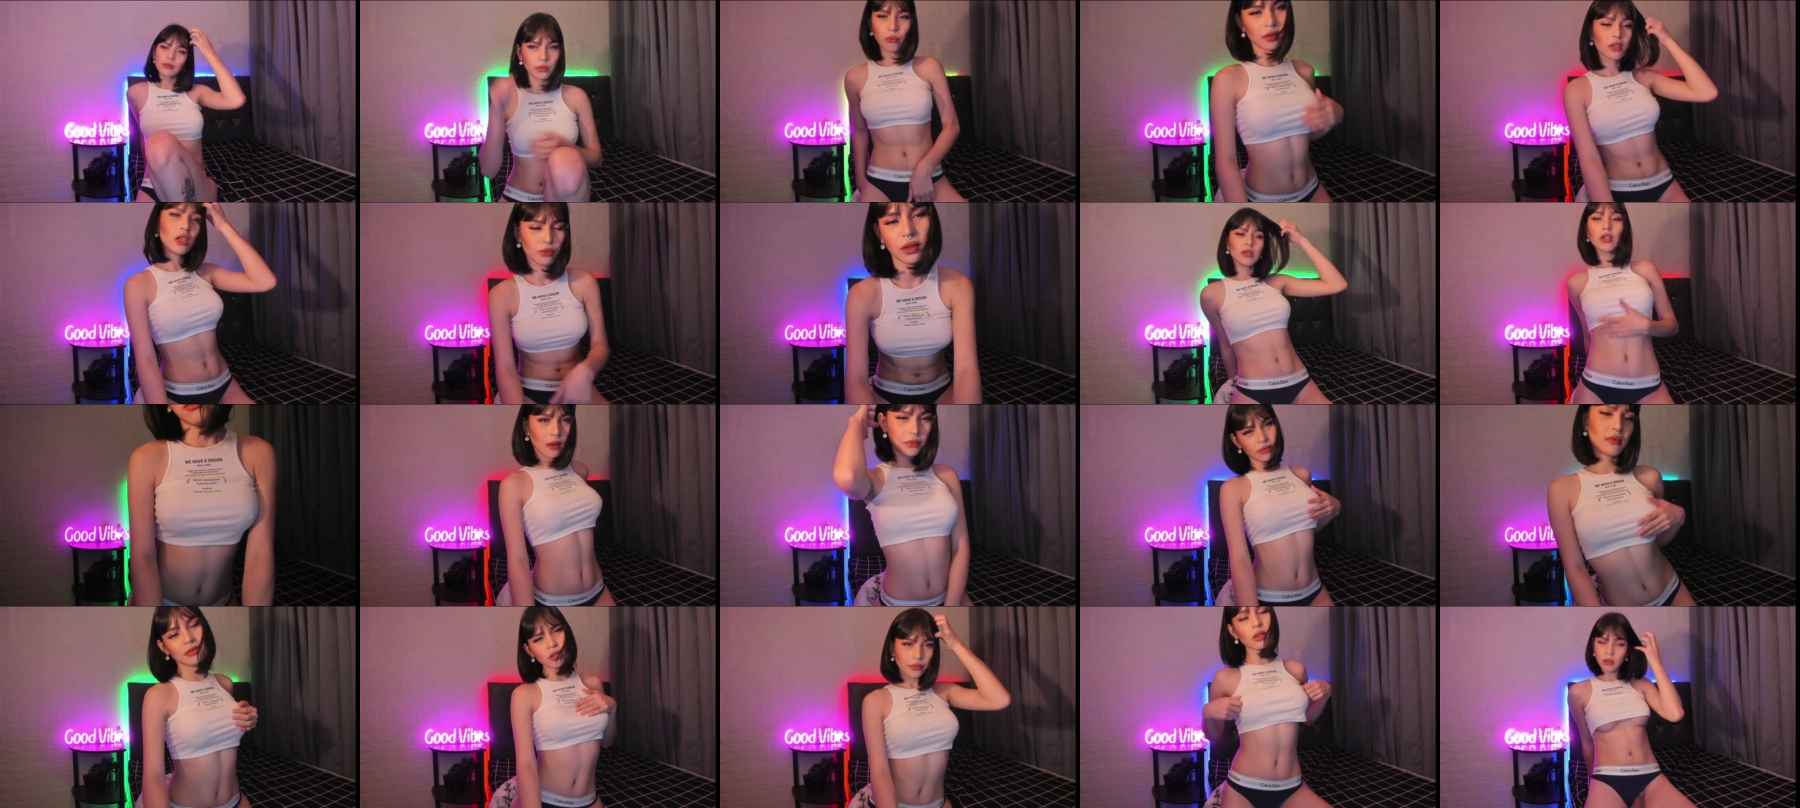 _Alluring_Christie_ Topless CAM SHOW @ Chaturbate 15-11-2021